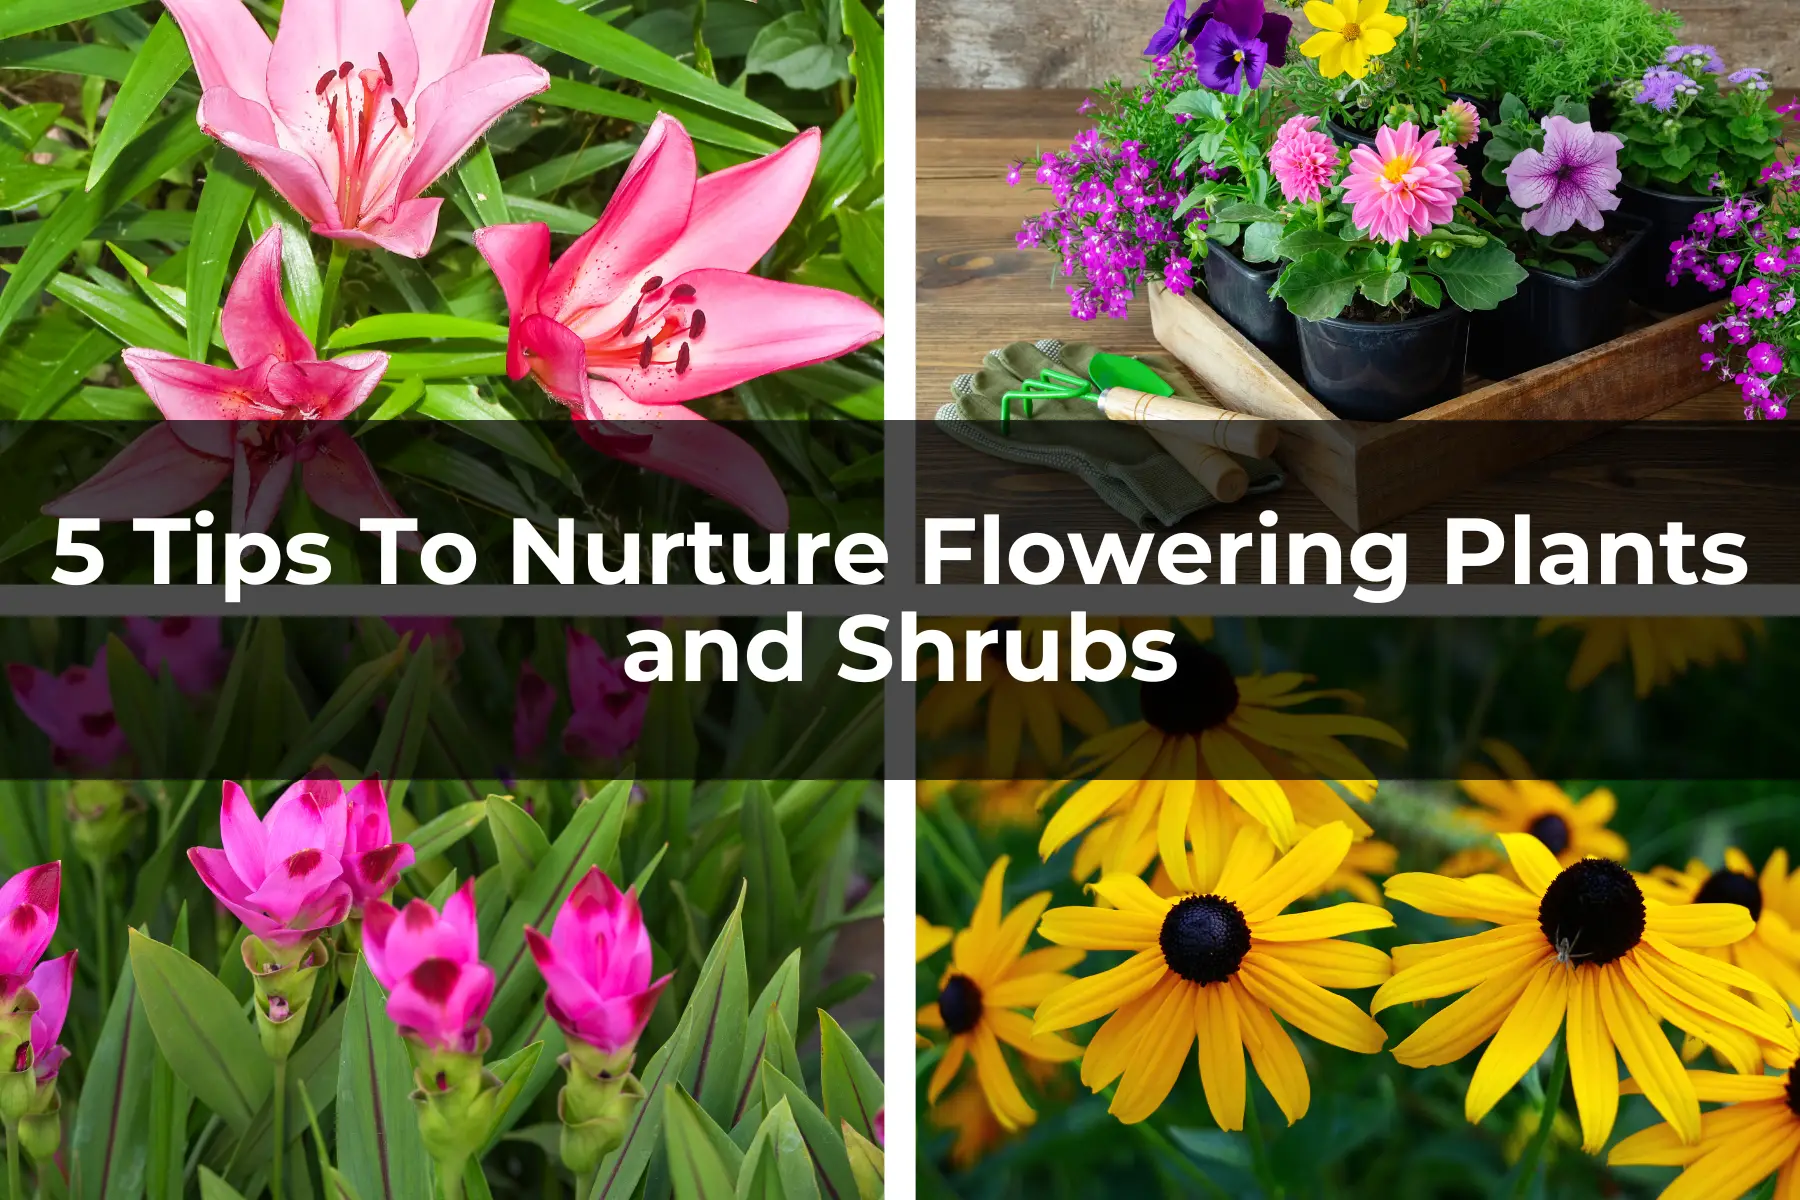 5 Tips To Nurture Flowering Plants and Shrubs